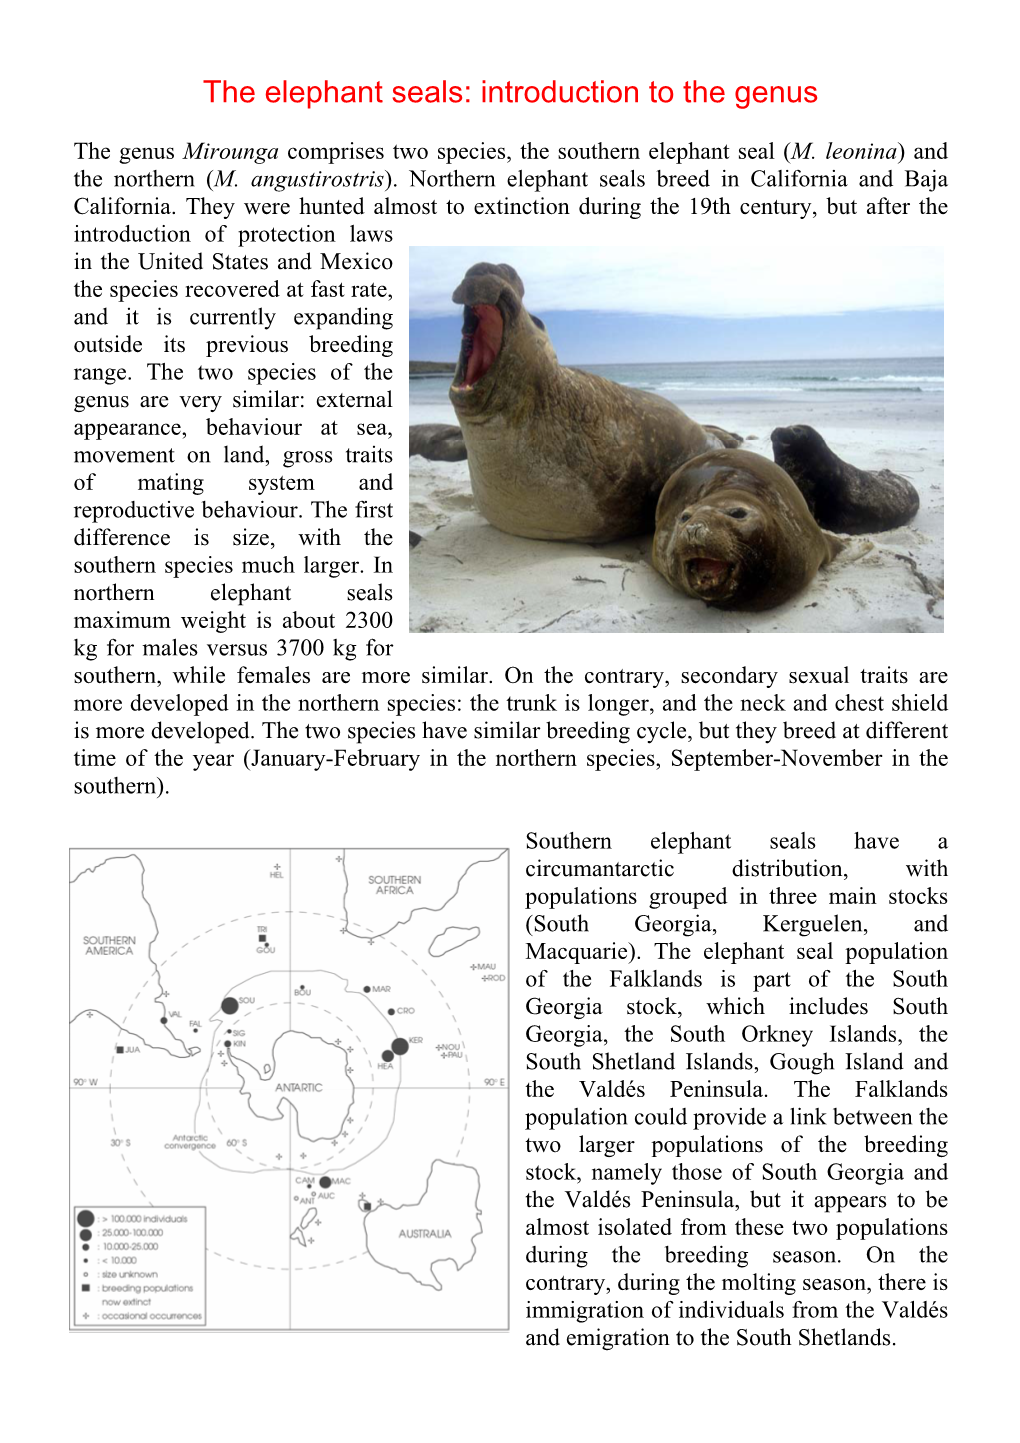 The Elephant Seals: Introduction to the Genus